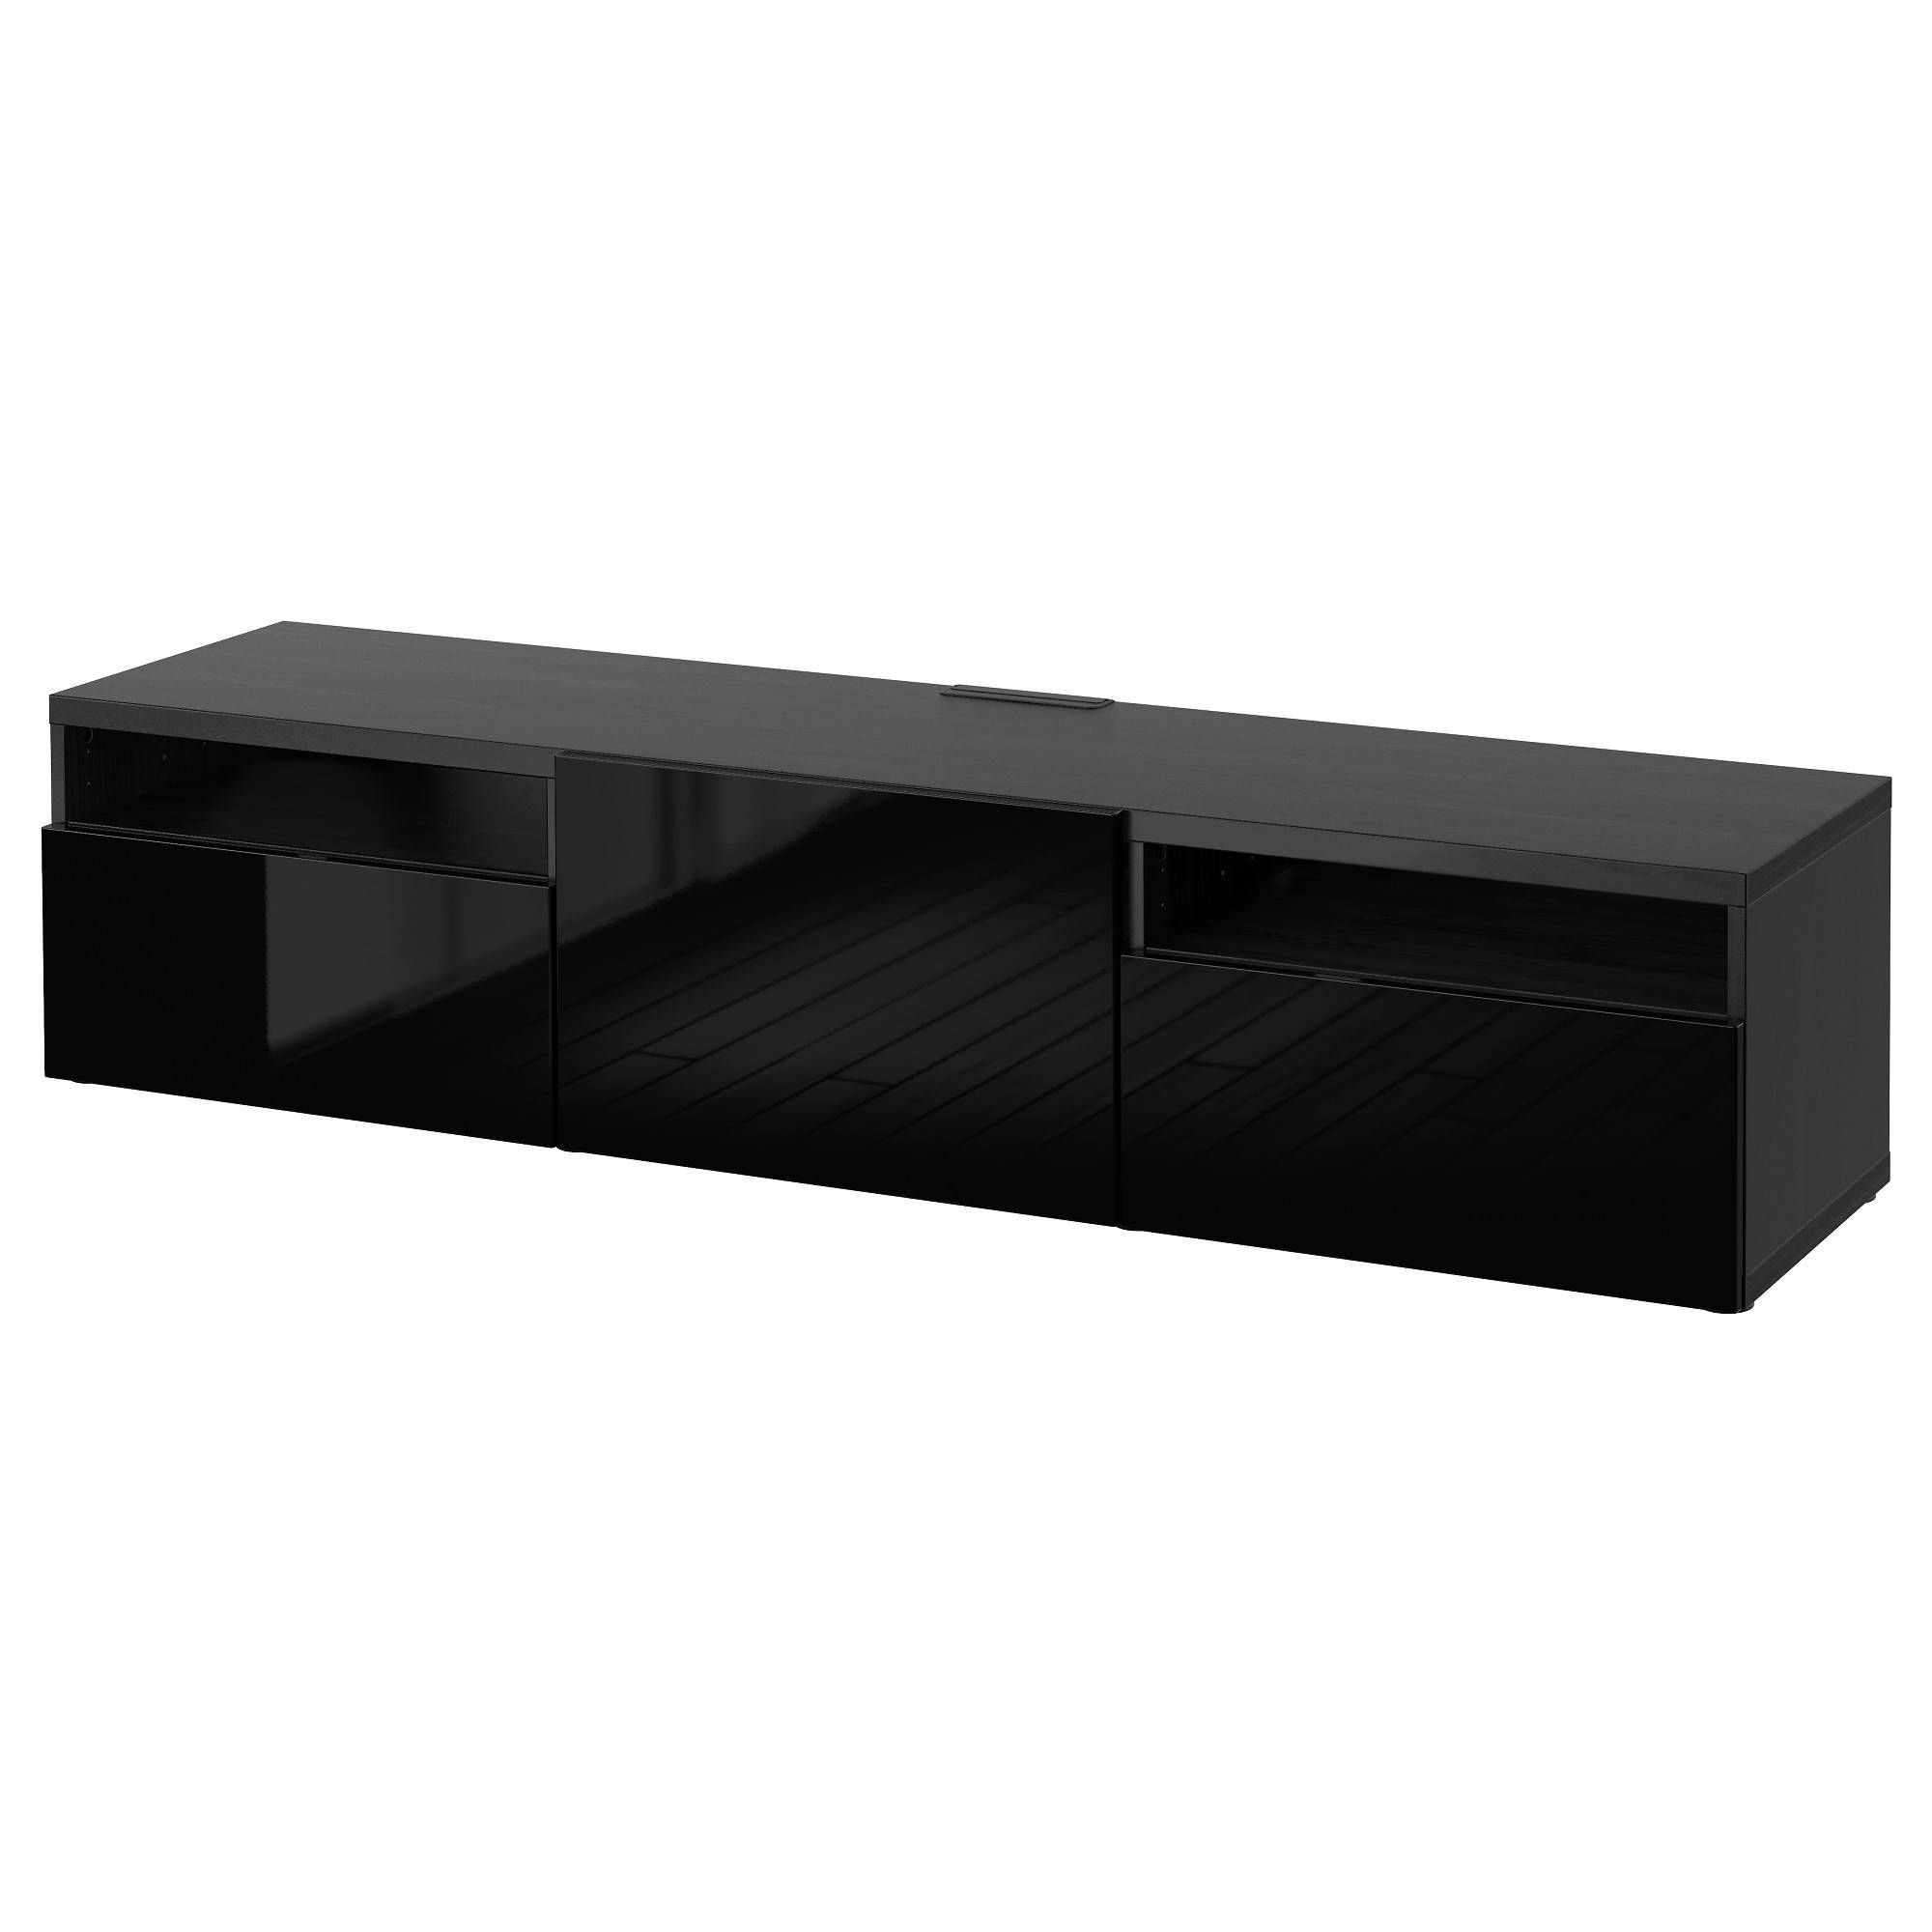 Large Tv Stands & Entertainment Centers – Ikea Pertaining To Shiny Black Tv Stands (View 11 of 15)